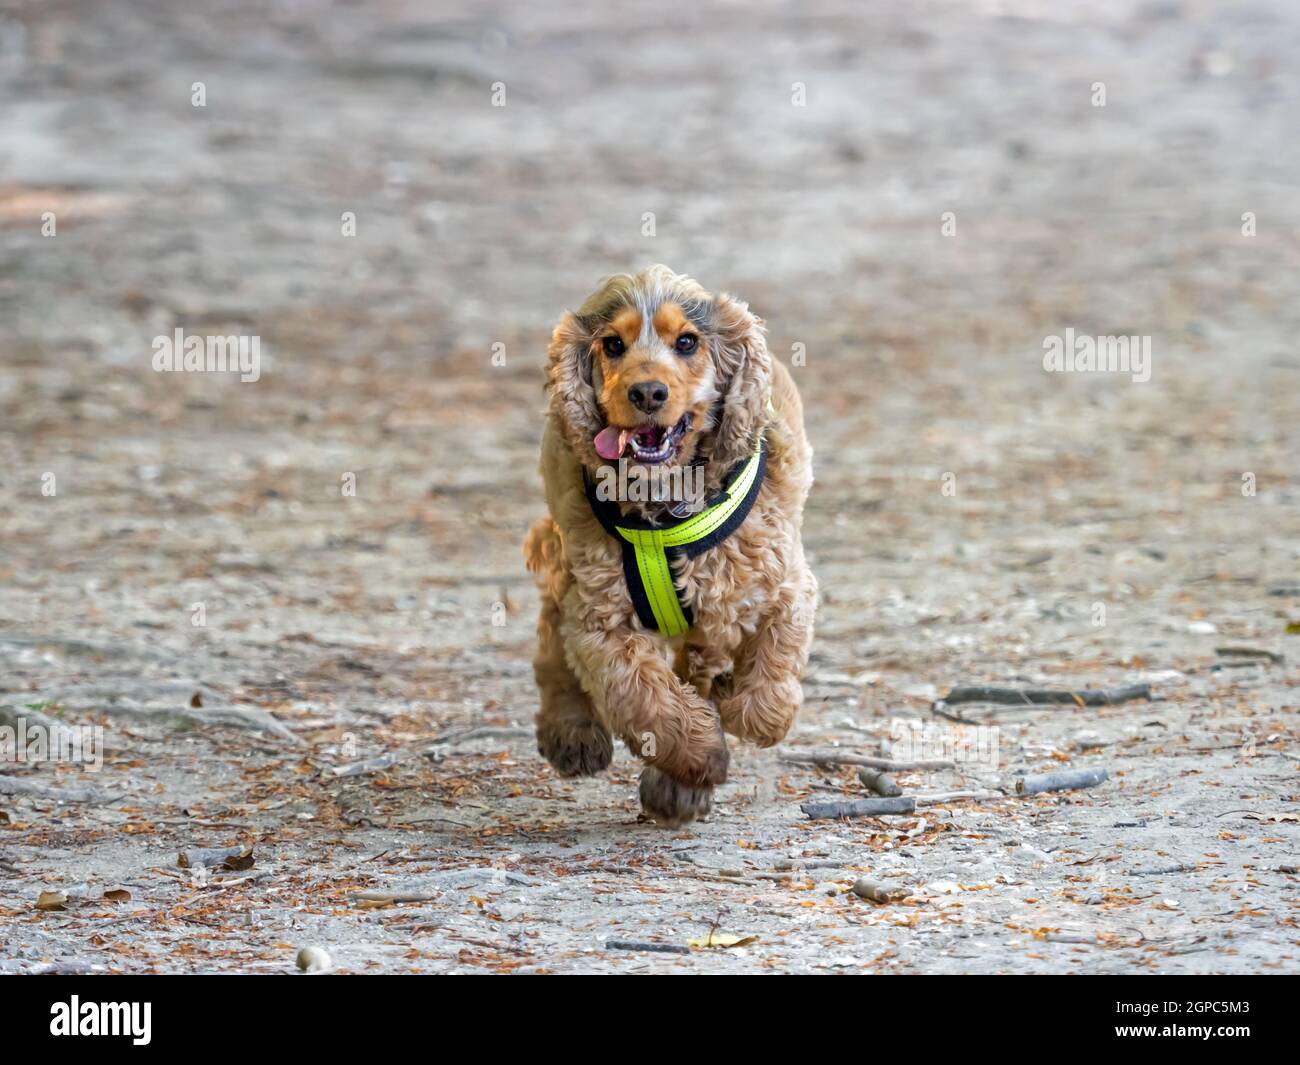 Happy sable coloured English Show Cocker Spaniel dog running with tongue out and eyes bright. Stock Photo